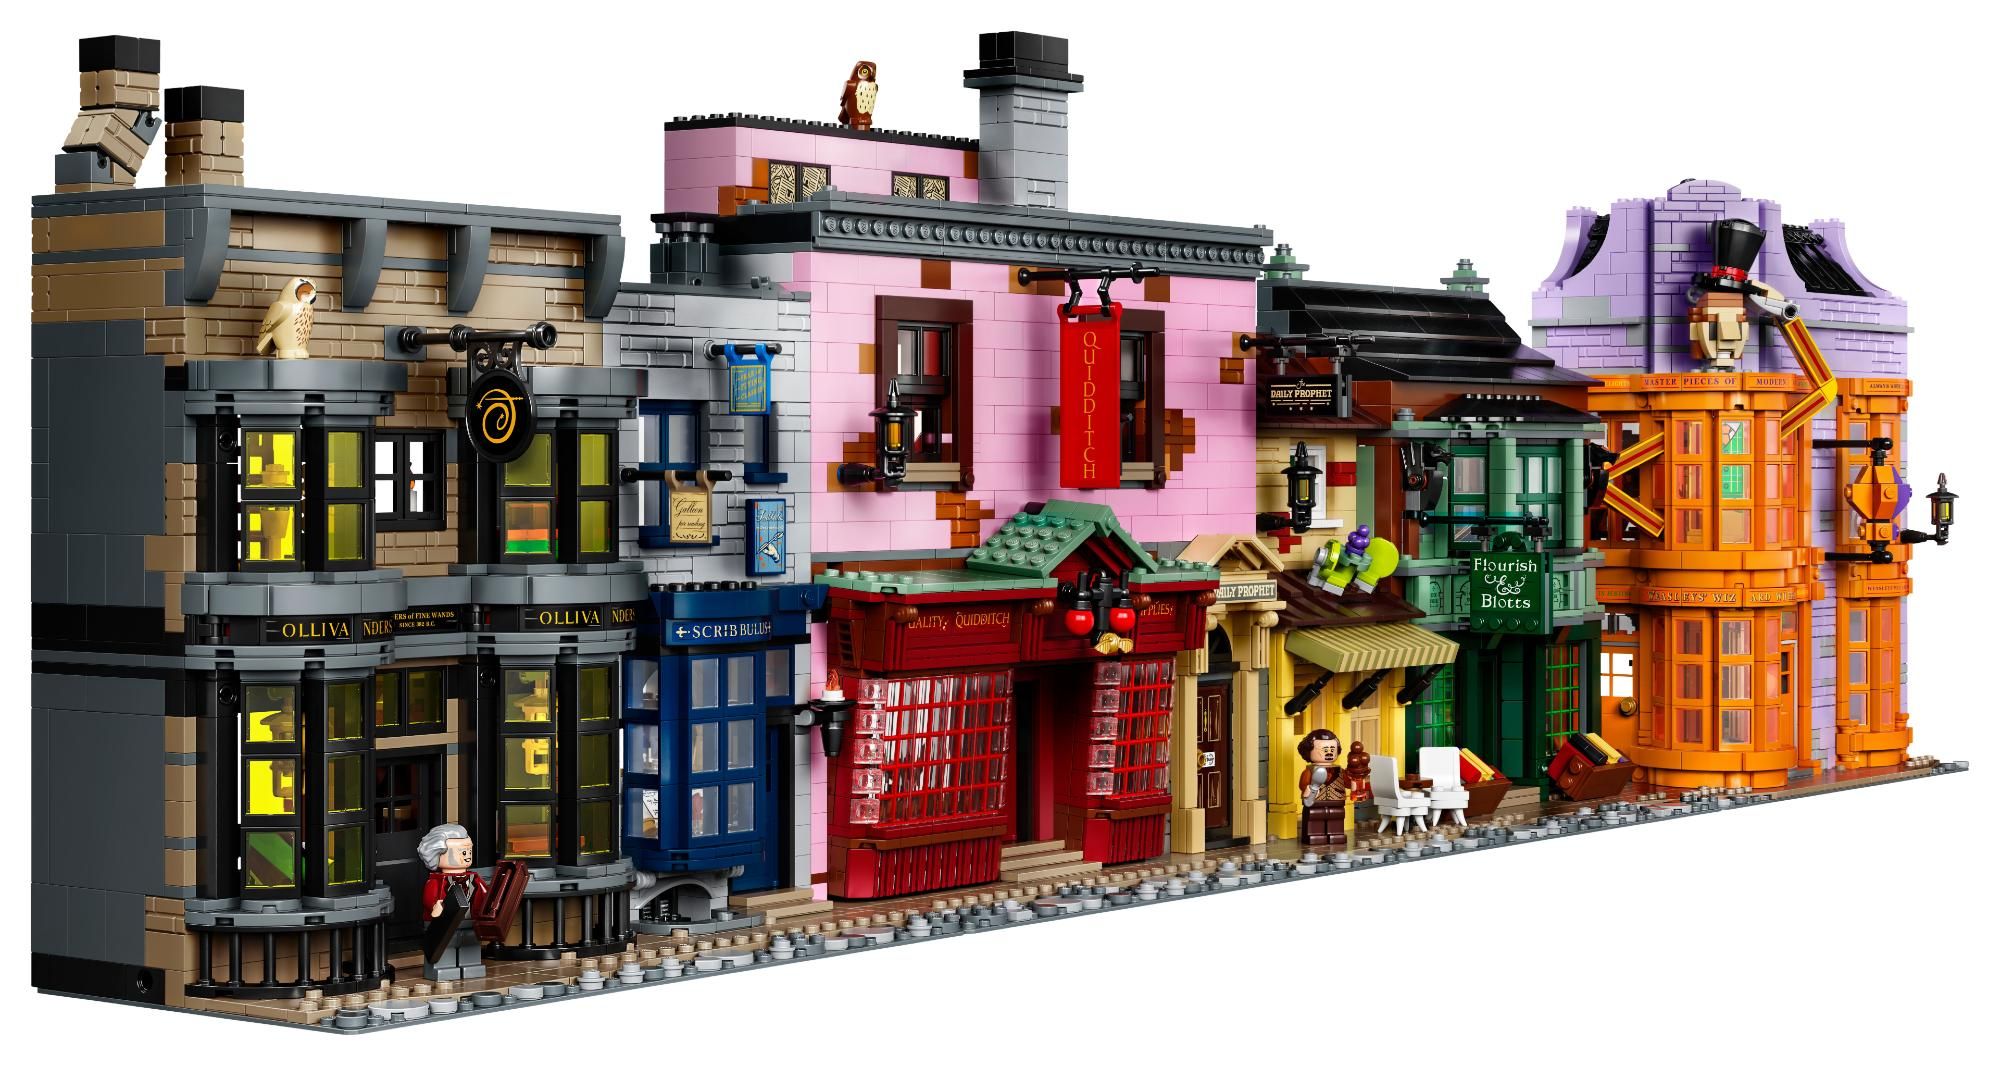 Massive Harry Potter Diagon Alley LEGO Set Launches With 16 Minifigures